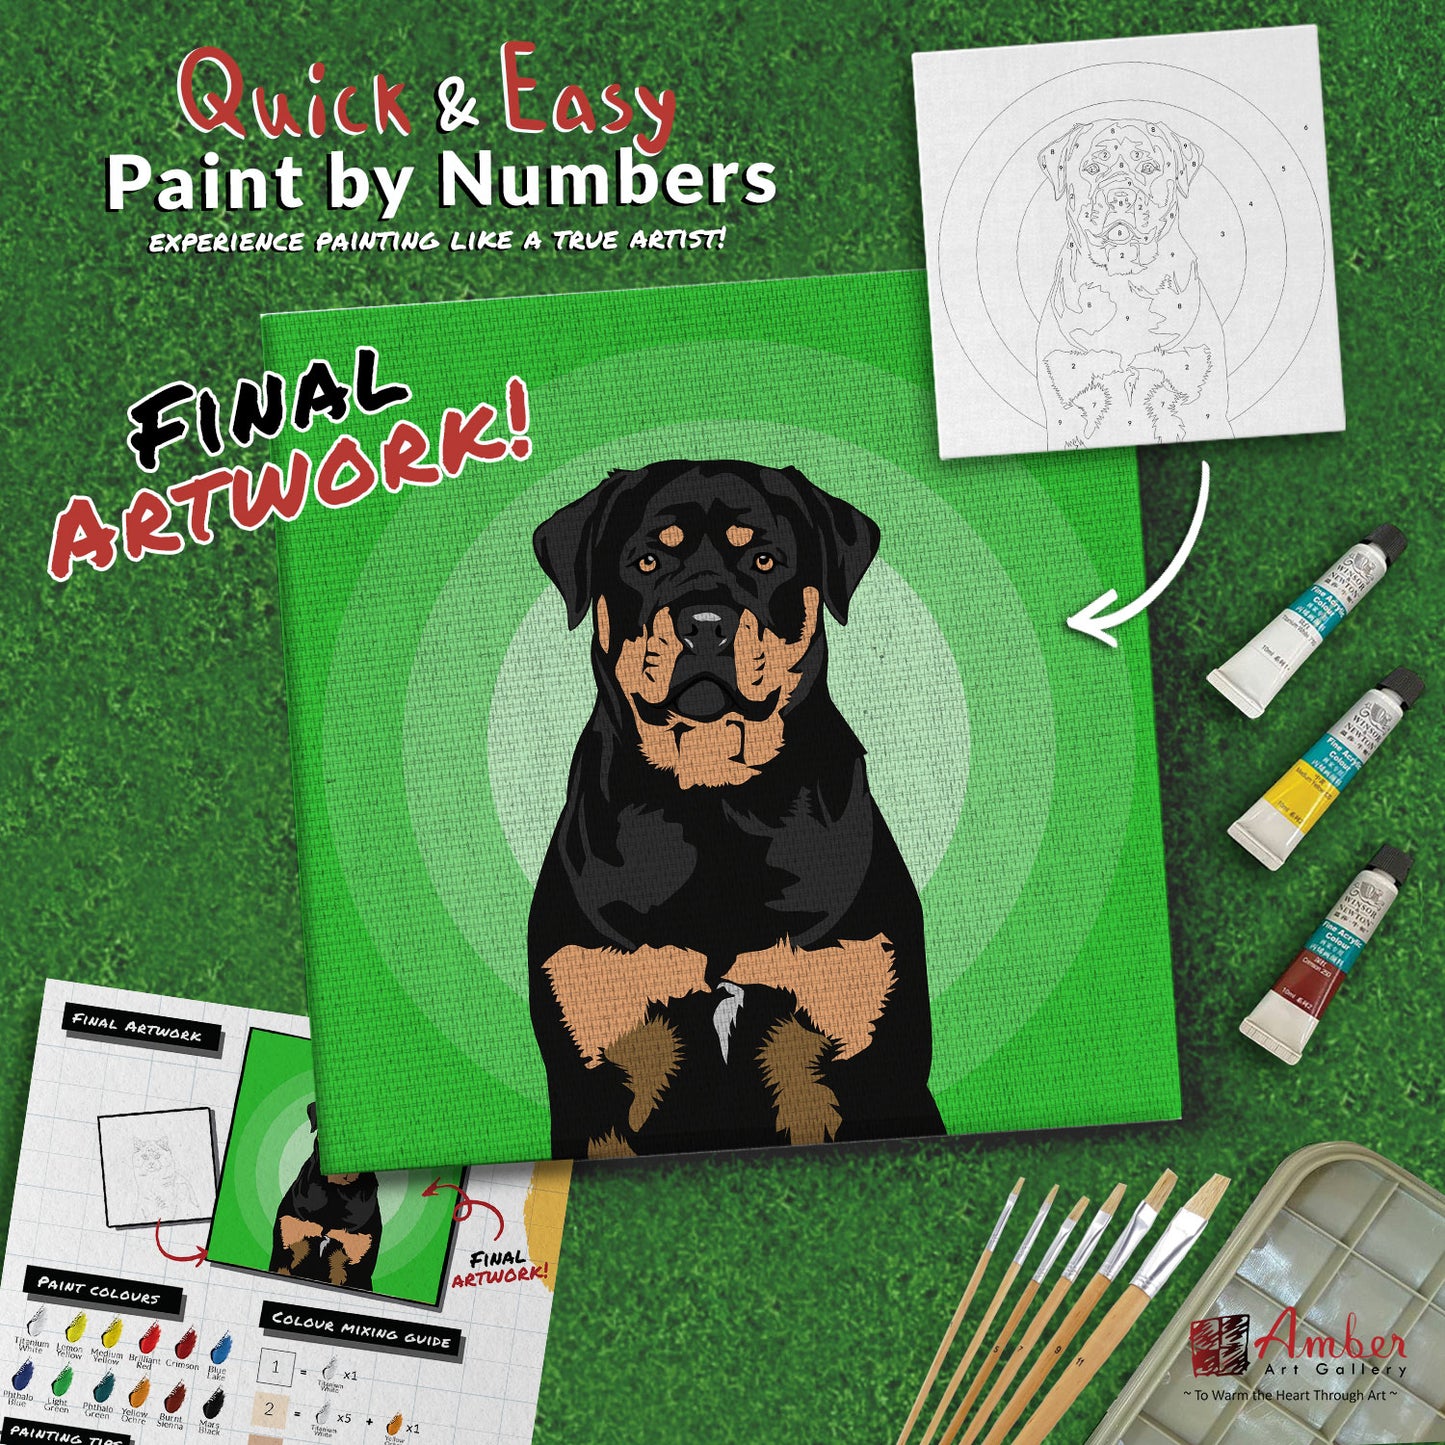 paint-by-numbers-painting-kit-dog-rottweiler